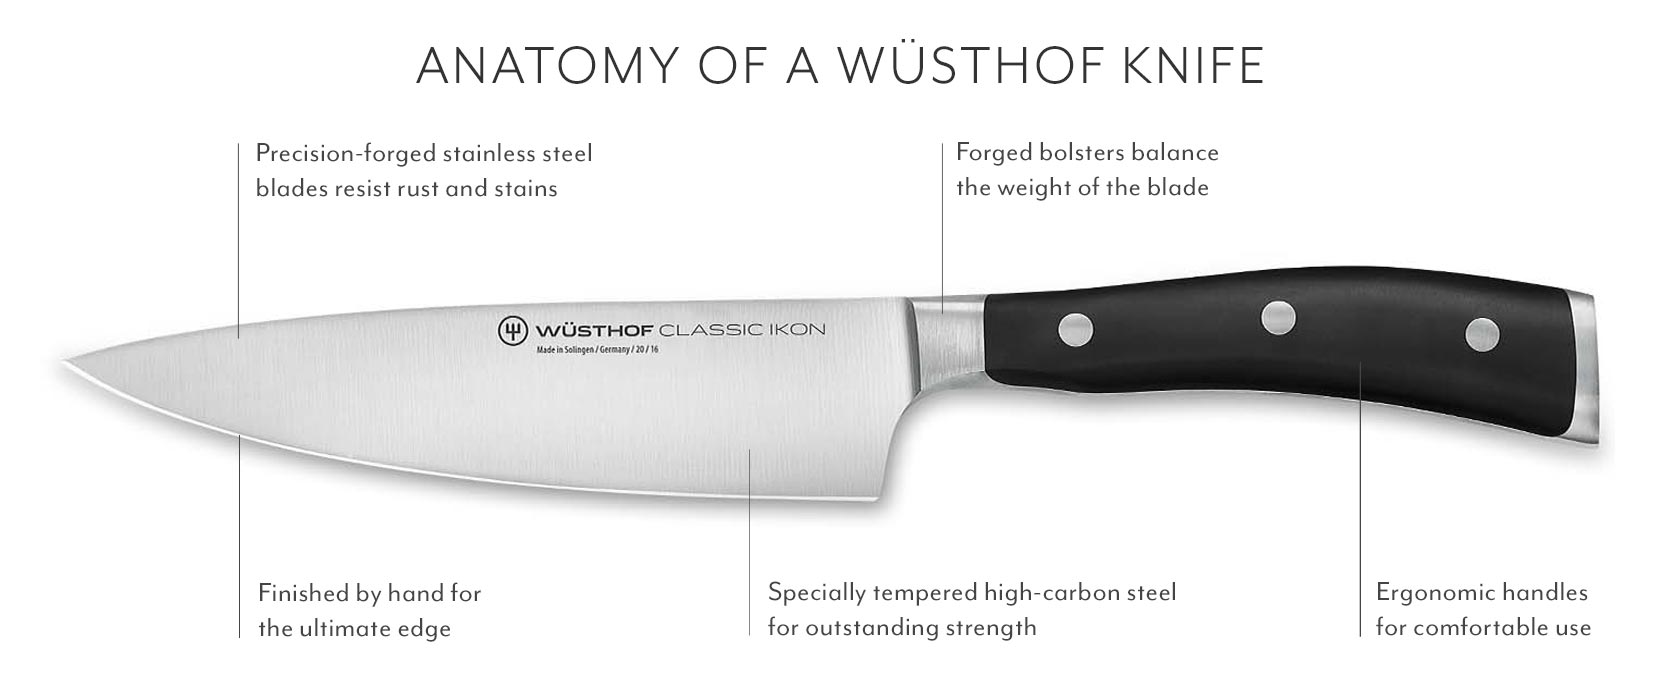 ANATOMY OF A WÜSTHOF KNIFE. Precision-forged stainless steel blades resist rust and stains. Finished by hand for the ultimate edge. Forged bolsters balance the weight of the blade. Specially tempered high-carbon steel for outstanding strength. Ergonomic handles for comfortable use.